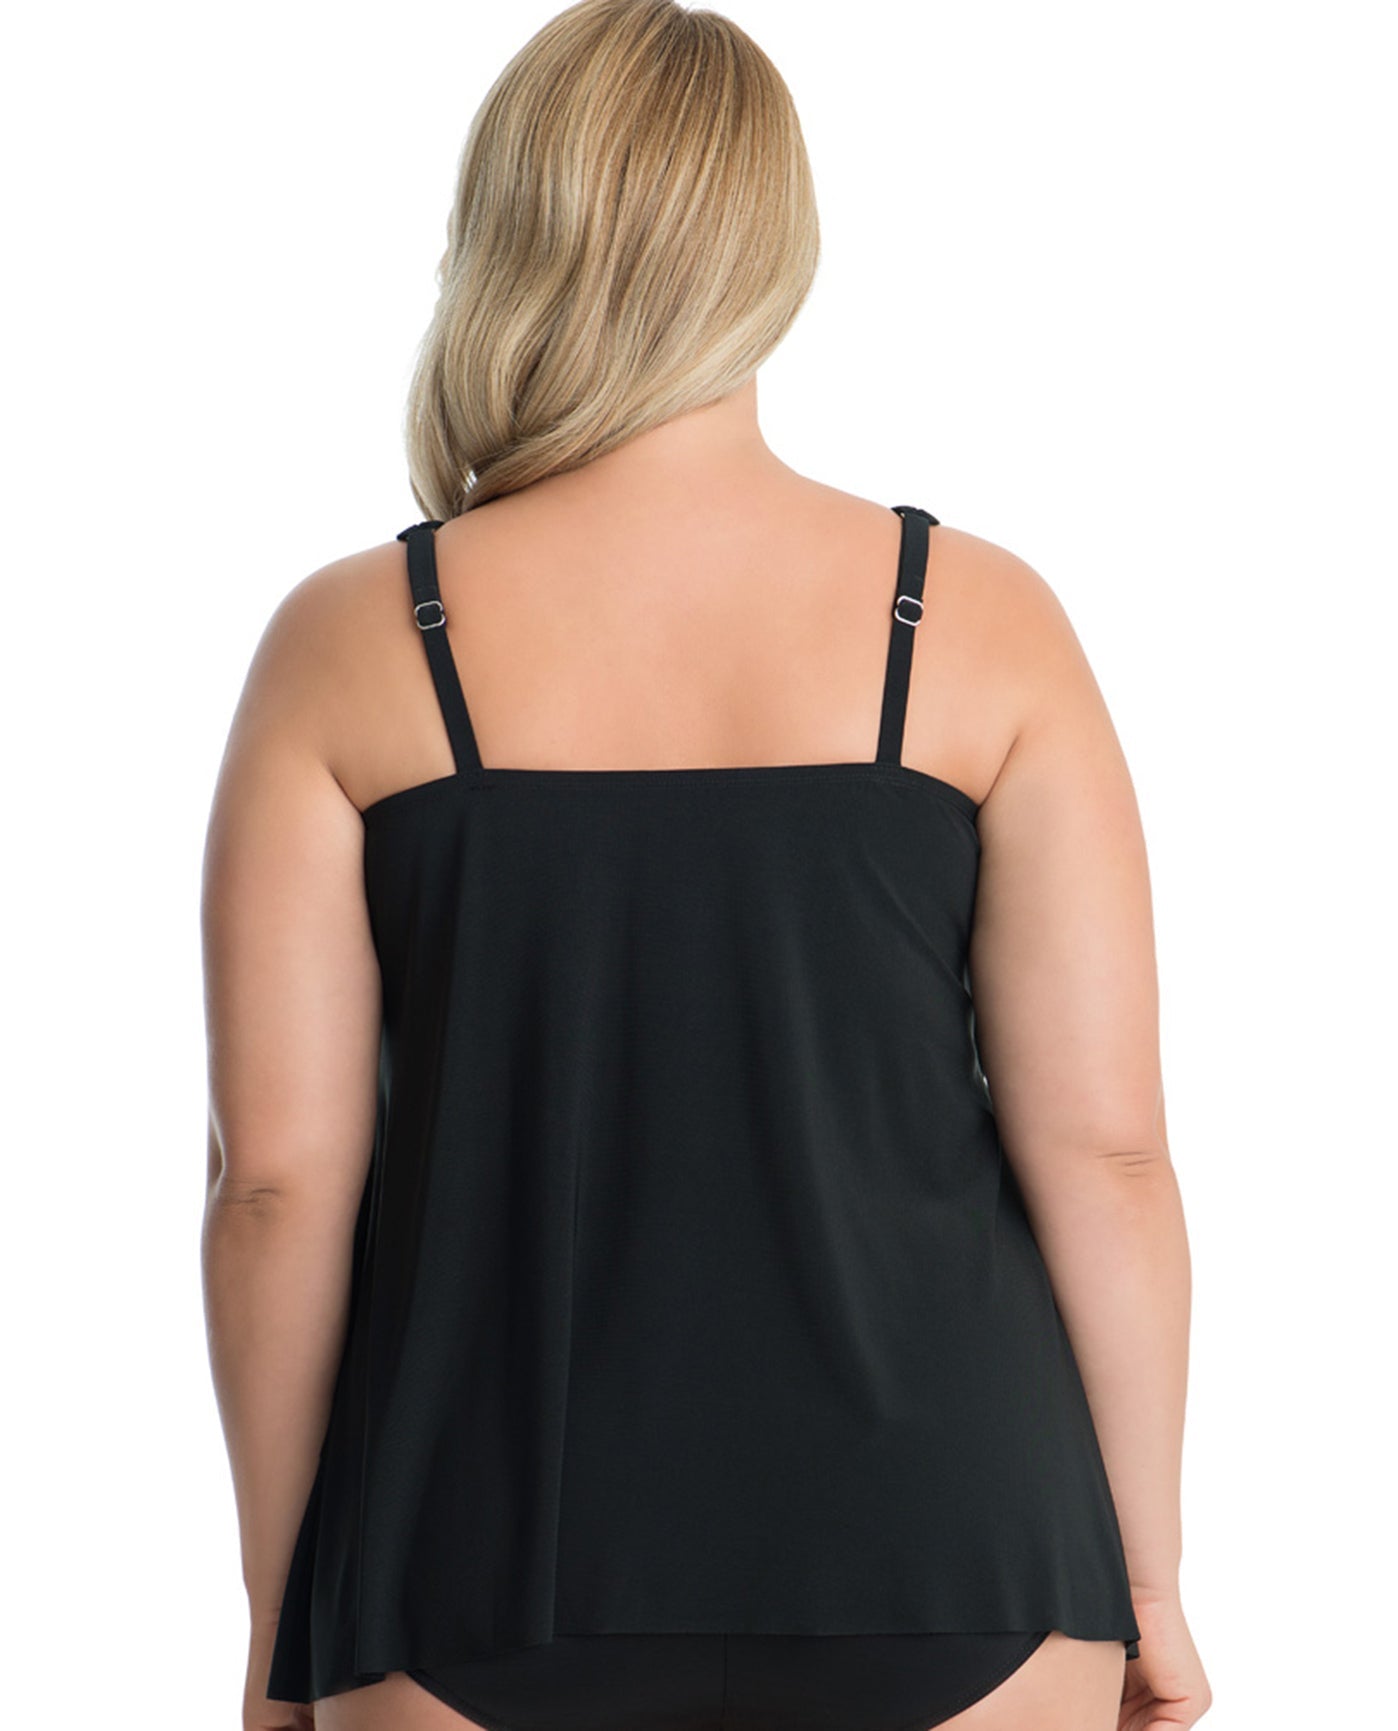 Back View Of Miraclesuit Illusionist Black Plus Size Mirage Underwire Tankini Top | MIR Black